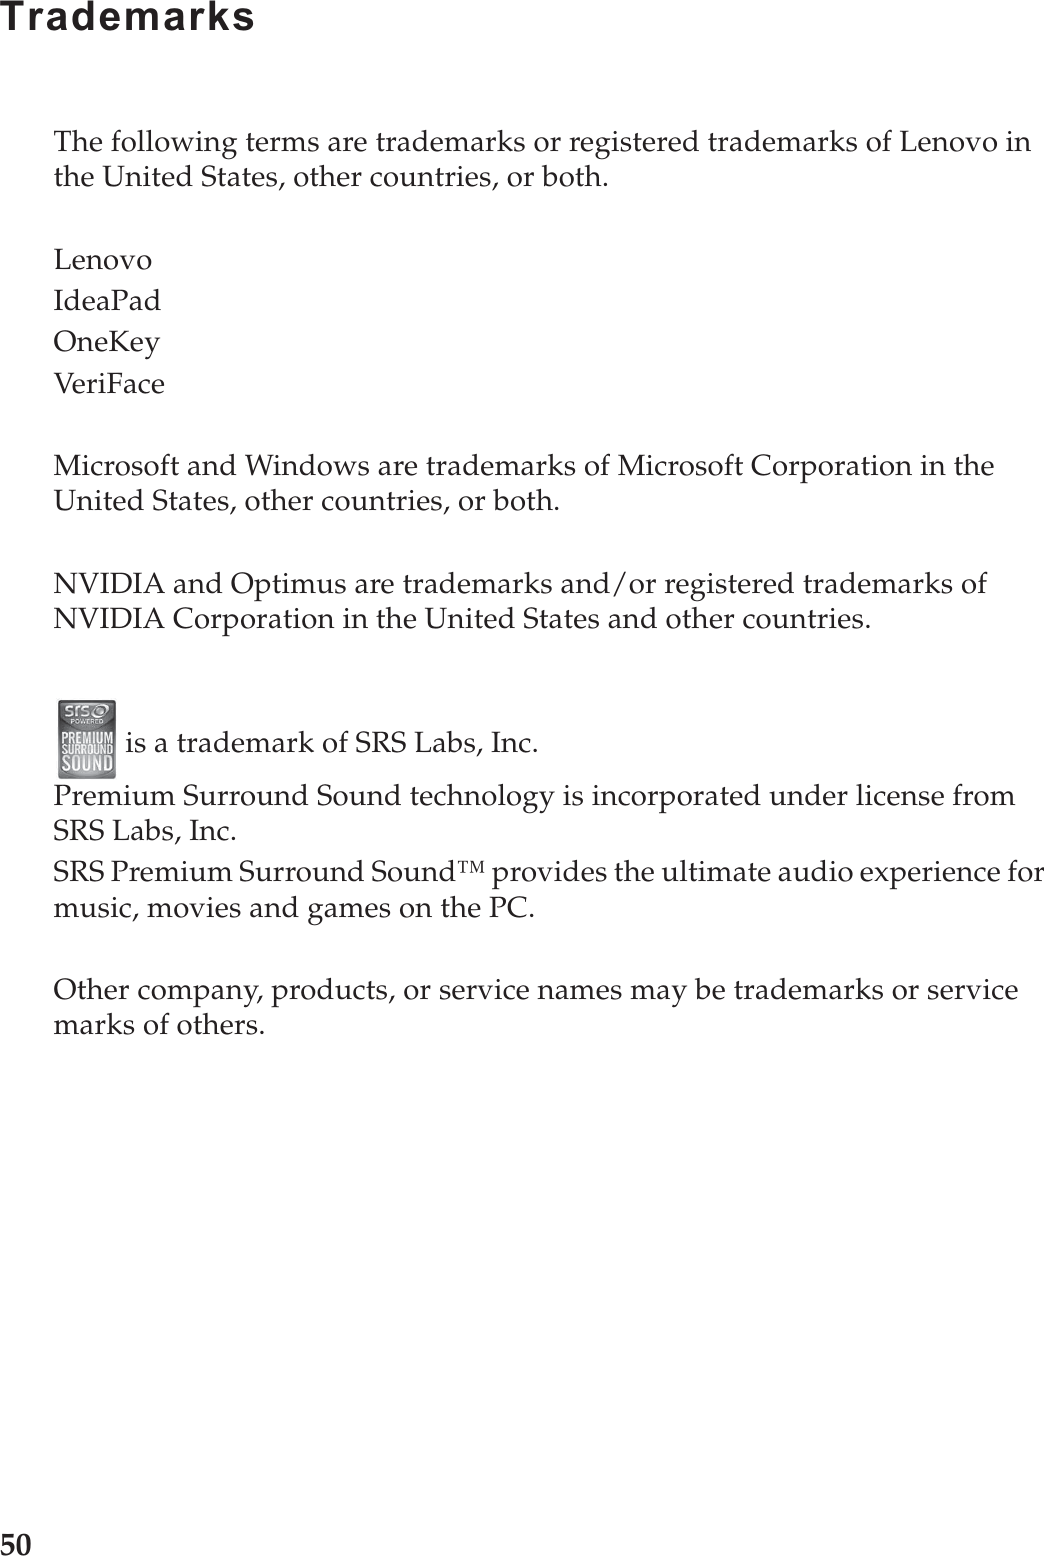 50TrademarksThe following terms are trademarks or registered trademarks of Lenovo in the United States, other countries, or both.LenovoIdeaPadOneKeyVeriFaceMicrosoft and Windows are trademarks of Microsoft Corporation in the United States, other countries, or both. NVIDIA and Optimus are trademarks and/or registered trademarks of NVIDIA Corporation in the United States and other countries. is a trademark of SRS Labs, Inc.Premium Surround Sound technology is incorporated under license from SRS Labs, Inc.SRS Premium Surround Sound™ provides the ultimate audio experience for music, movies and games on the PC.Other company, products, or service names may be trademarks or service marks of others.